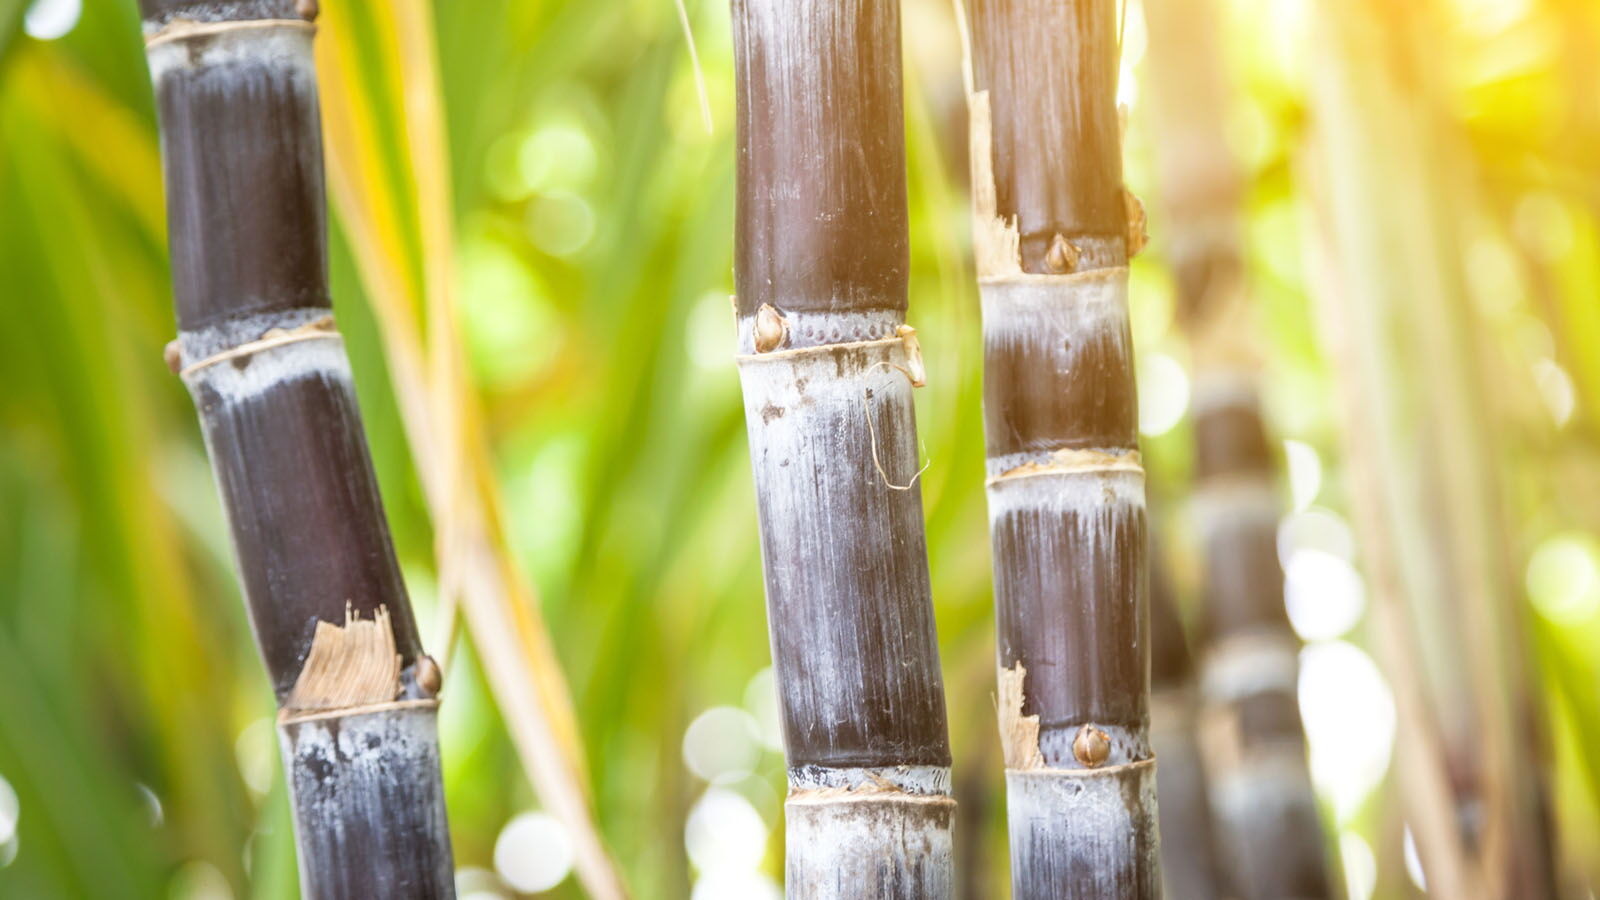 Sugar Canes: The Origin of Sustainable Cardboard Material